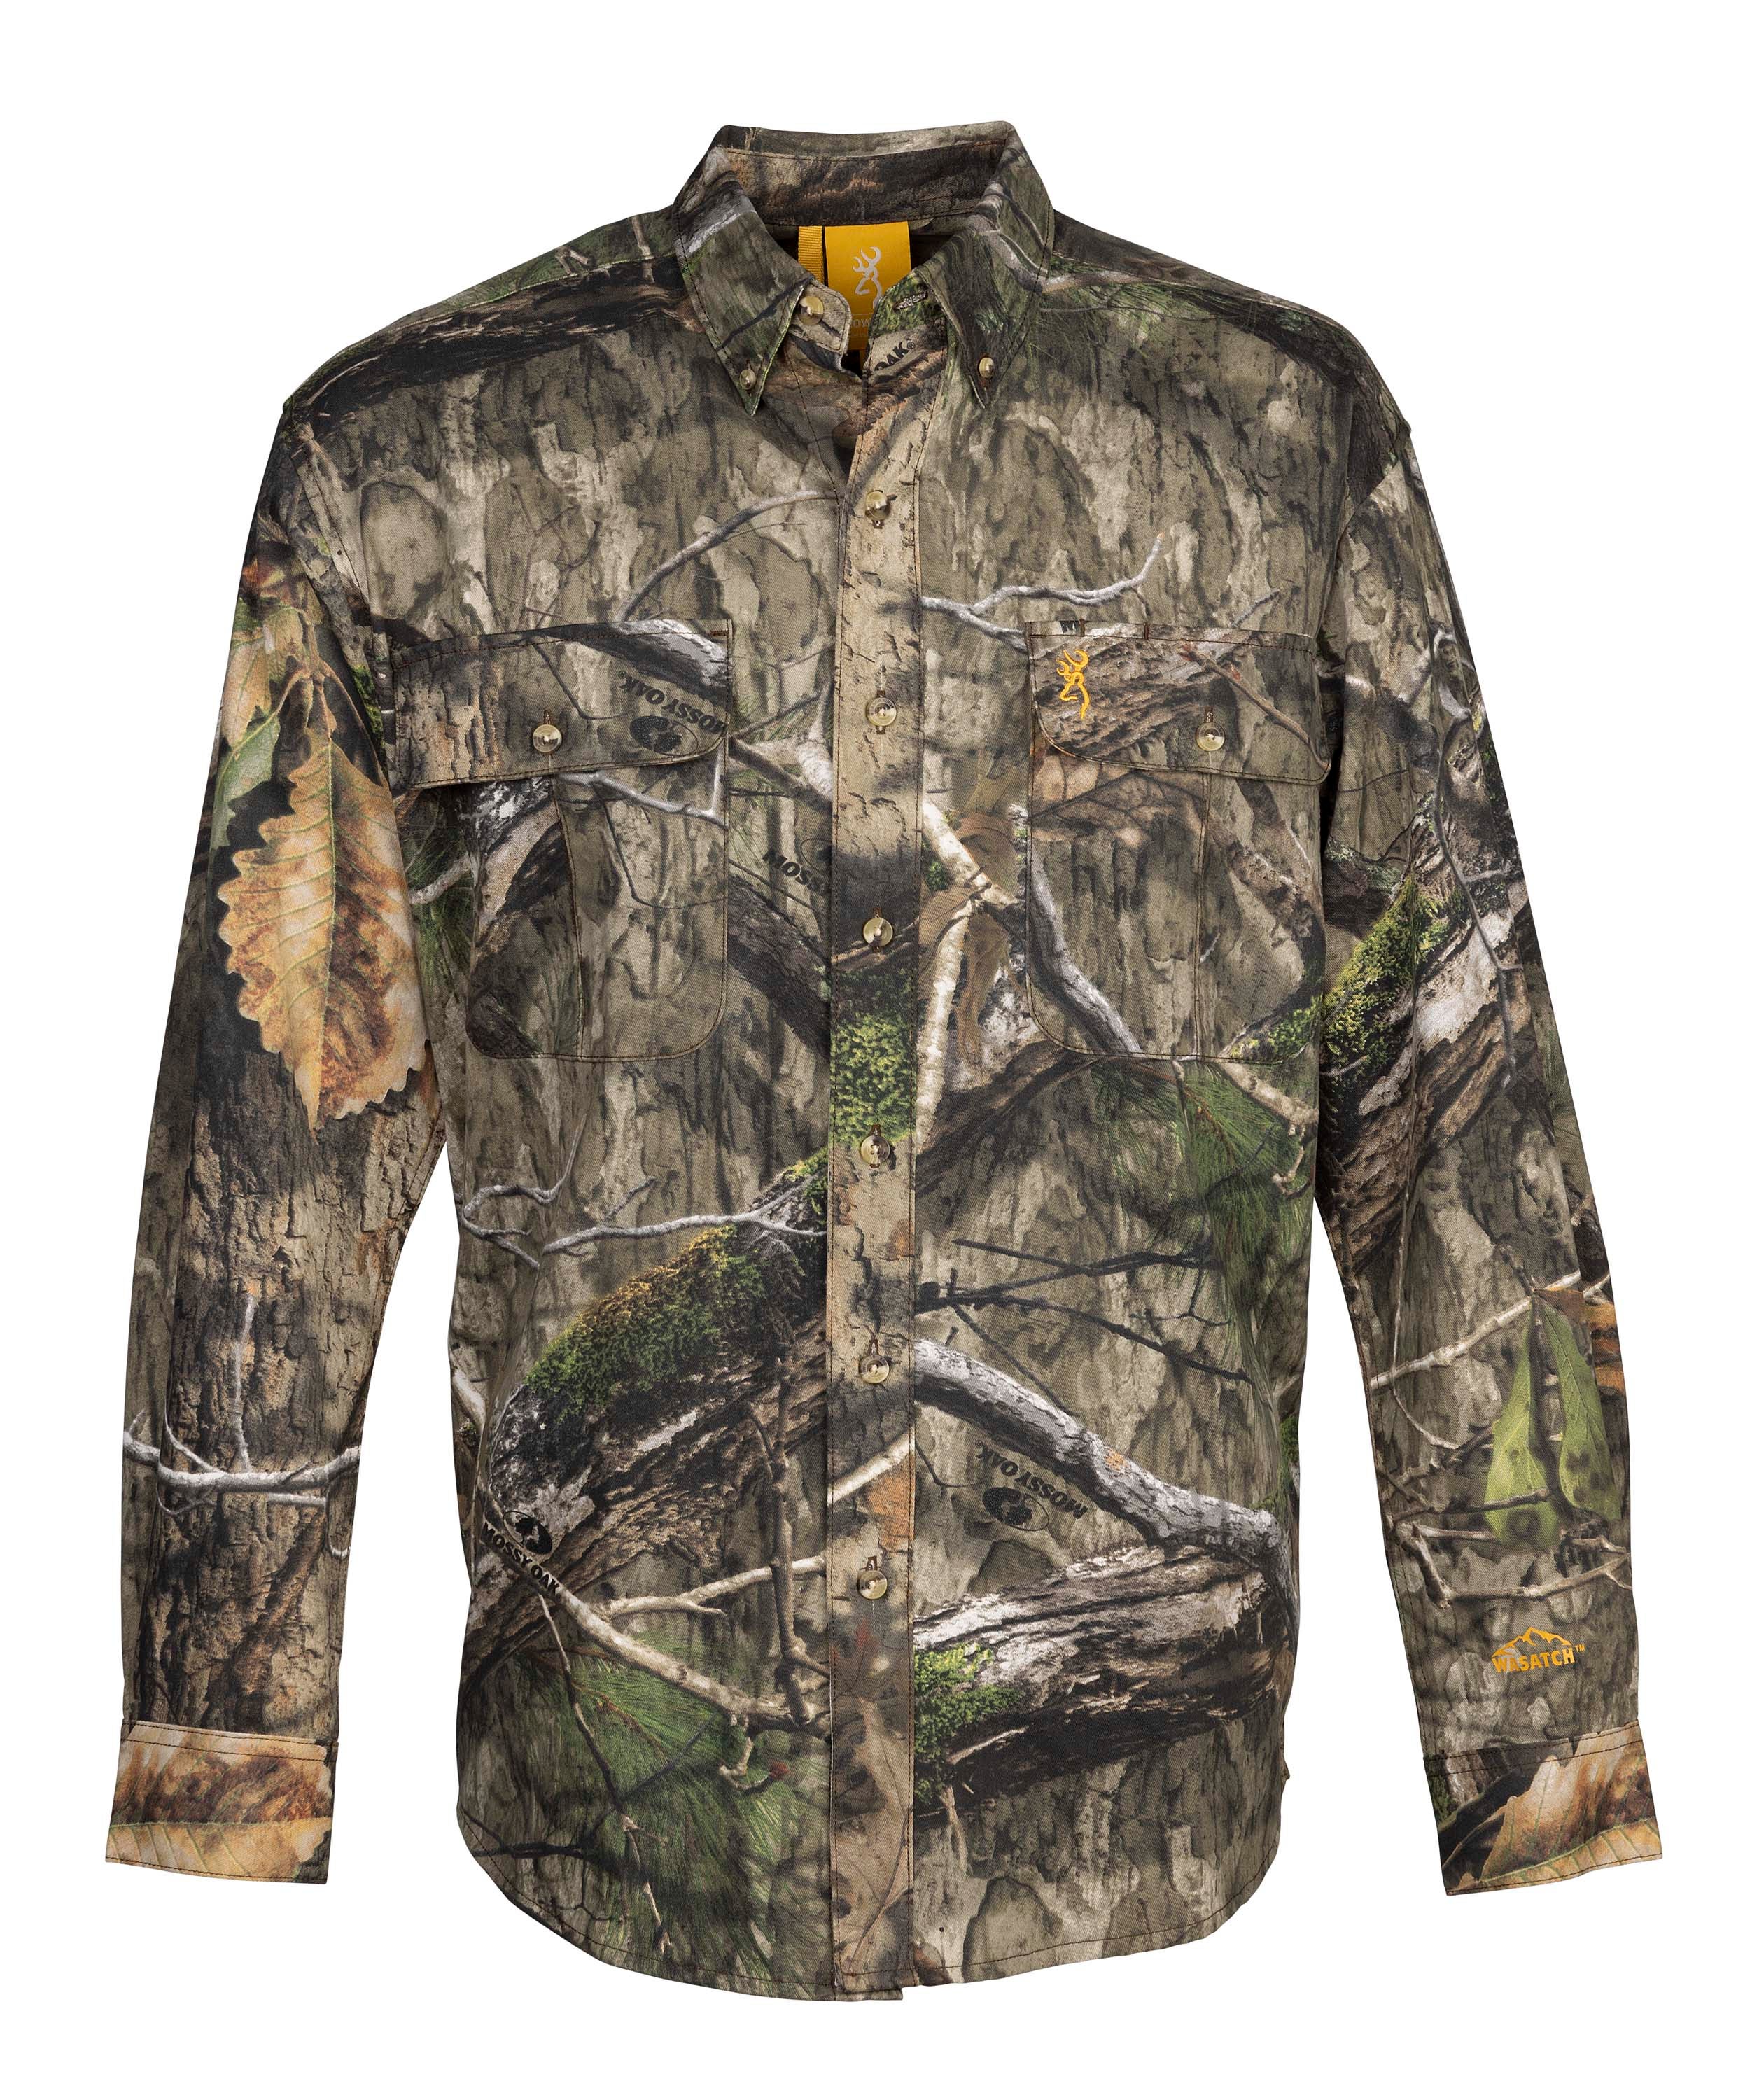 Browning Wasatch CB Short Sleeve T-Shirt - Mossy Oak Country DNA Camo